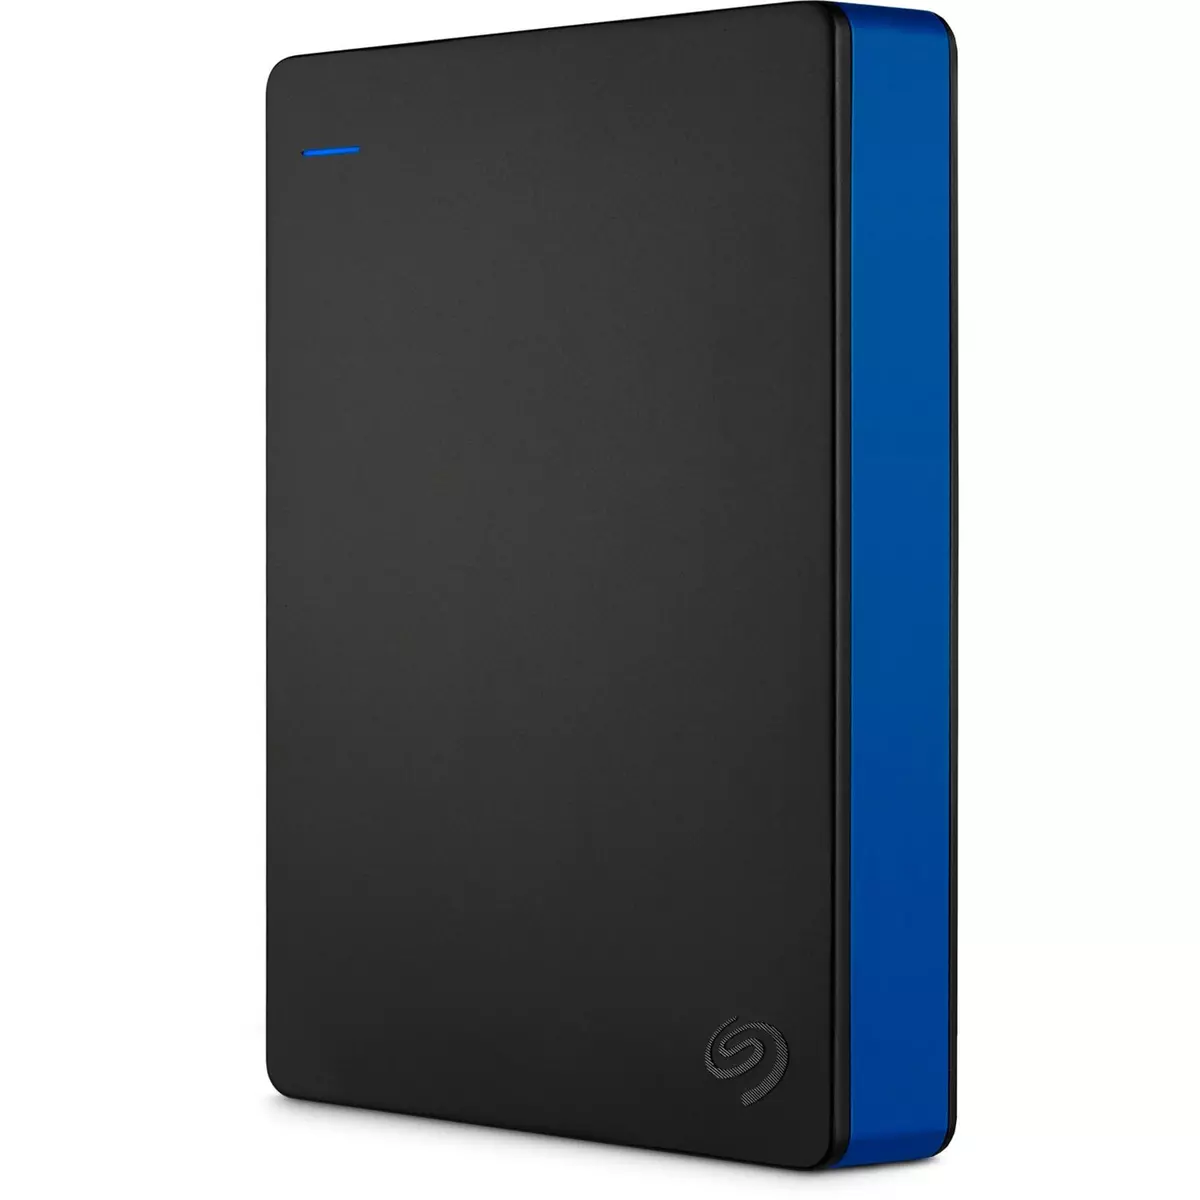 SEAGATE Disque dur 2.5 PS4 4TO